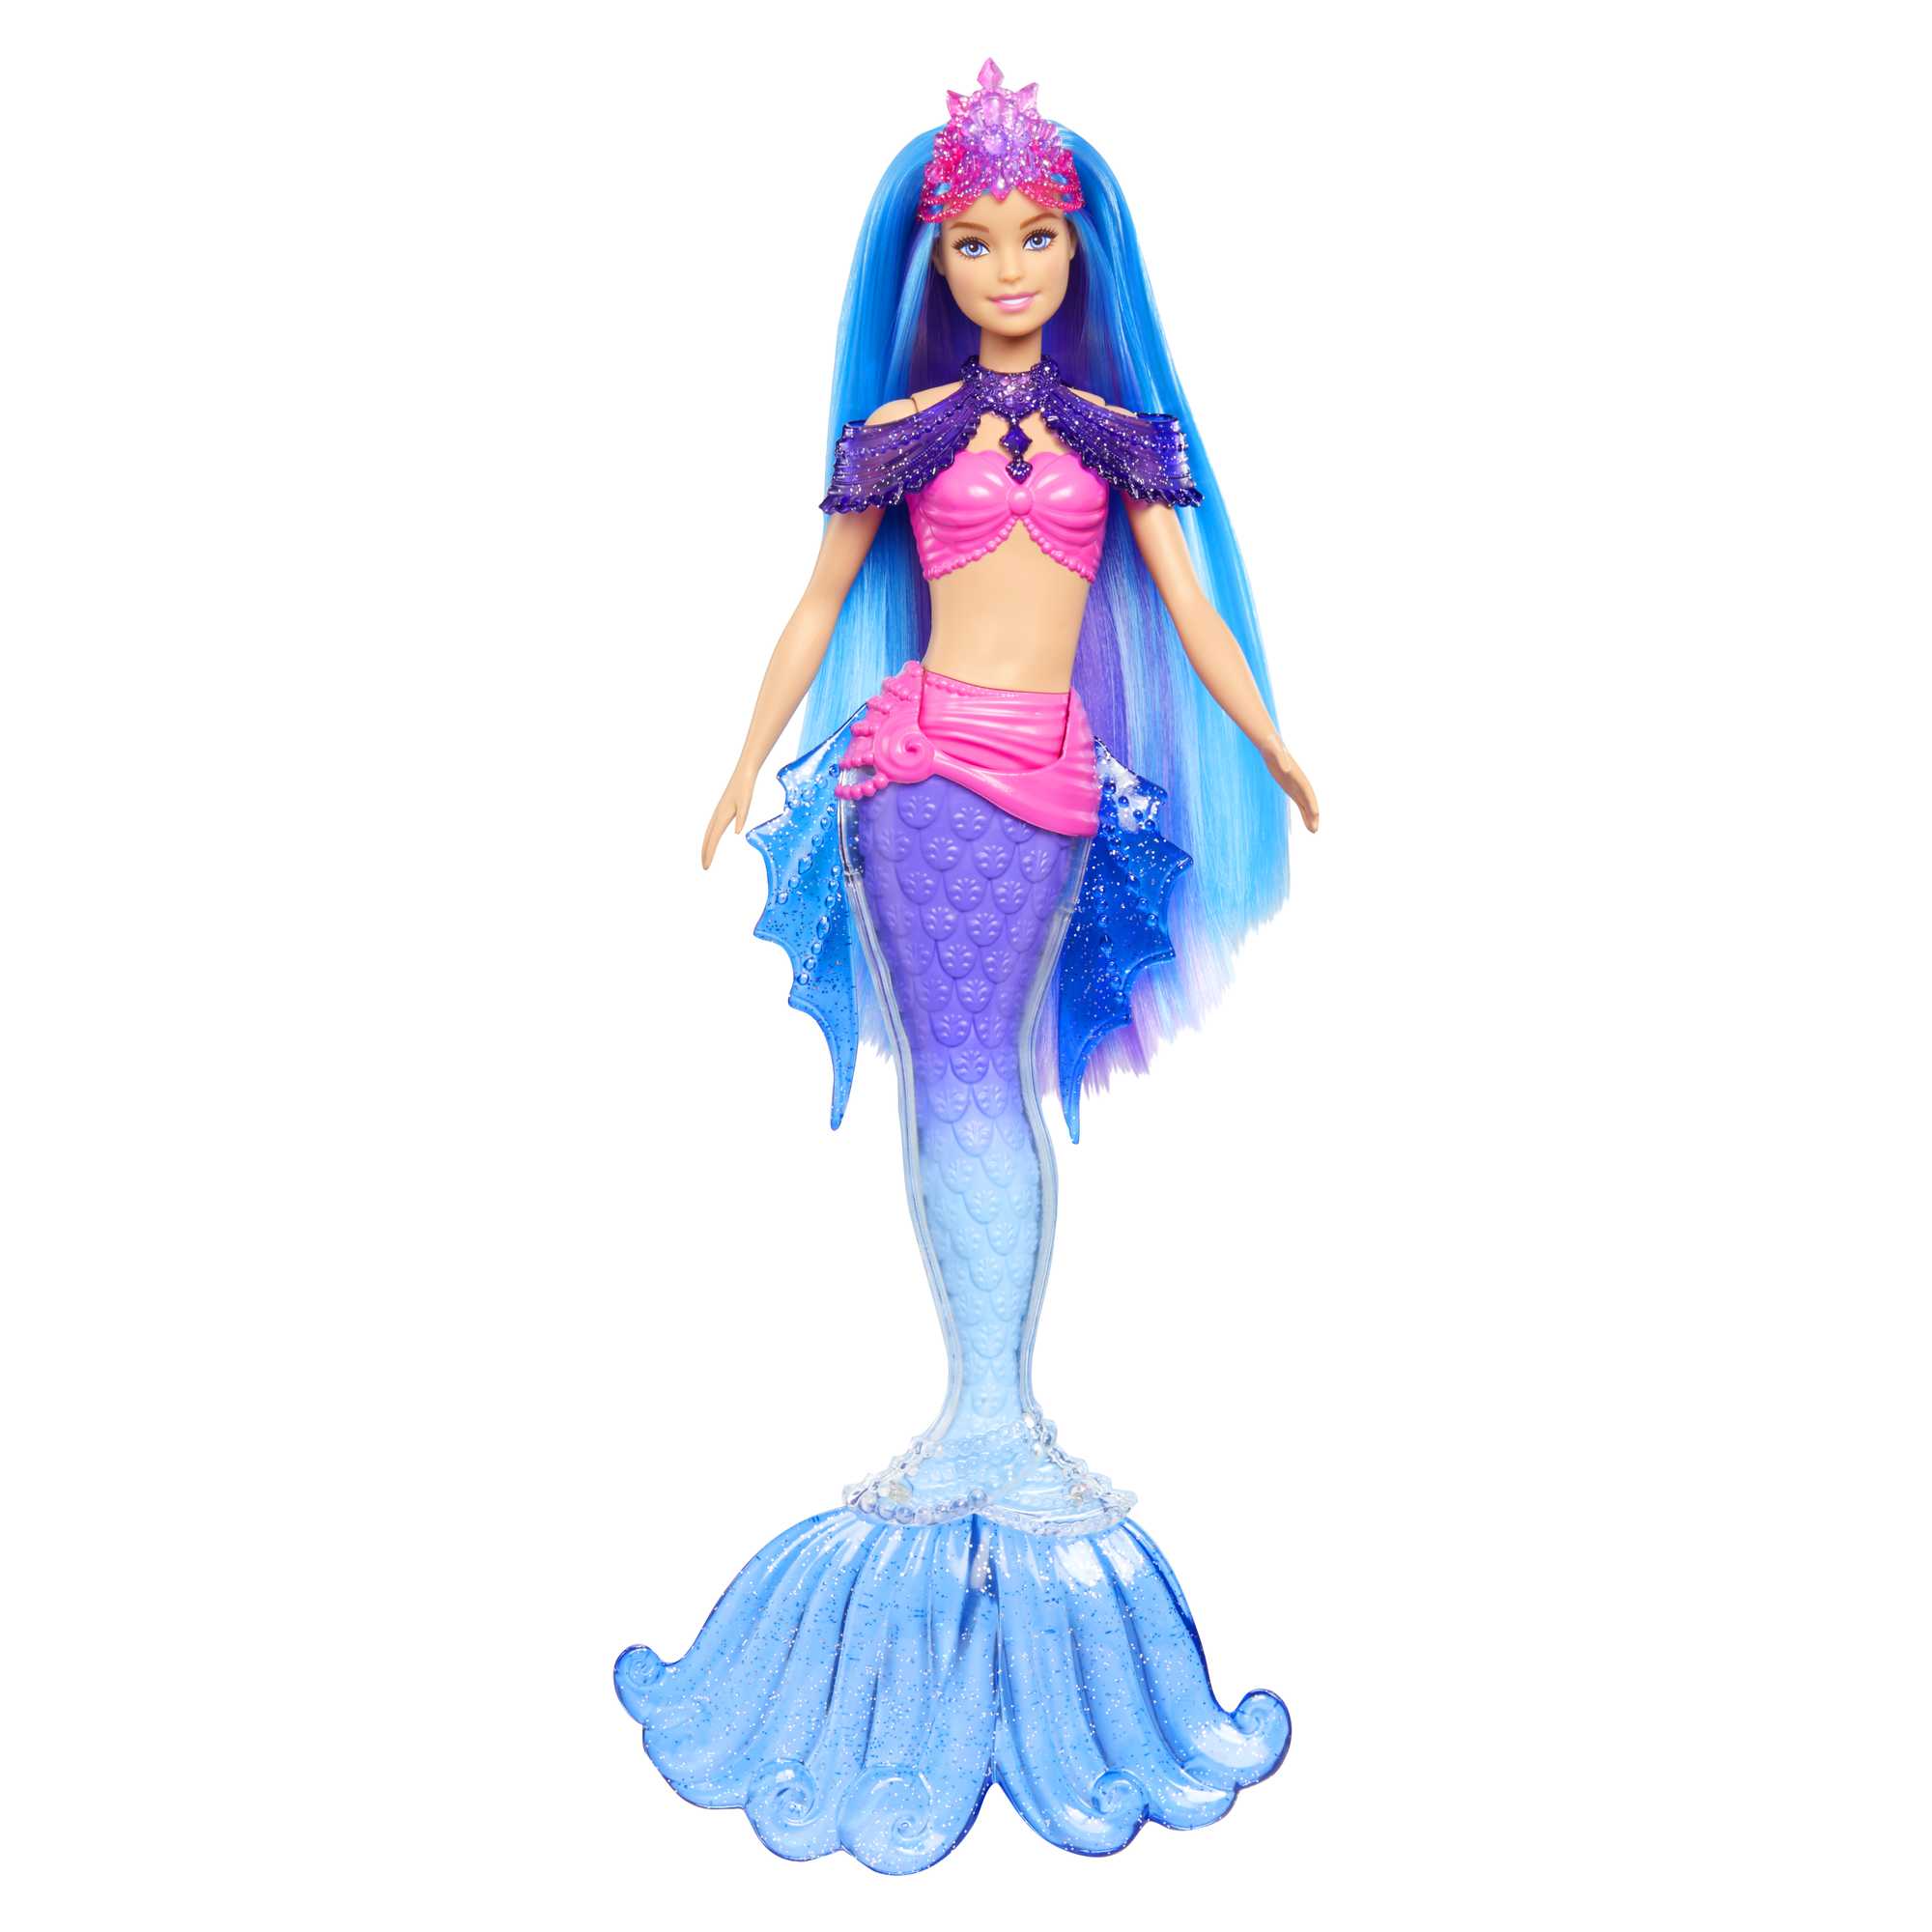 Barbie Mermaid Power Doll and Accessories, HHG52